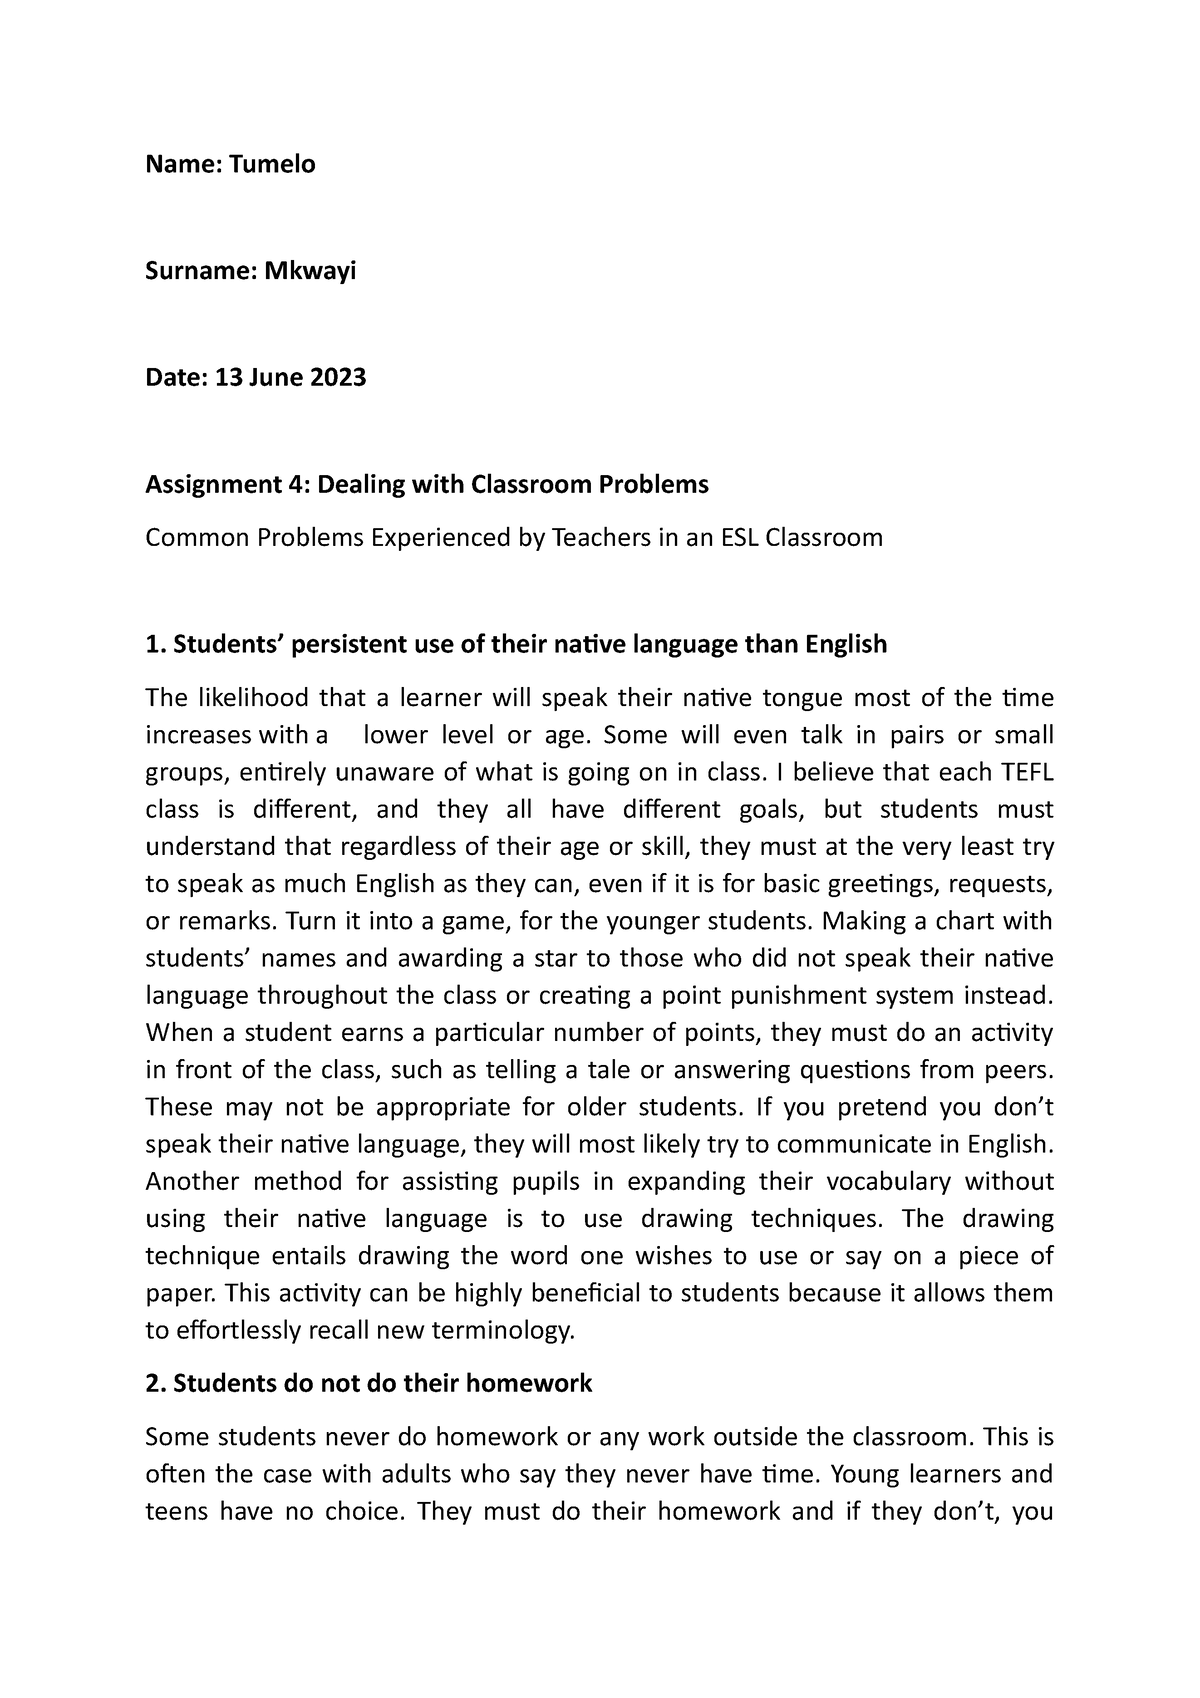 assignment 4 dealing with classroom problems